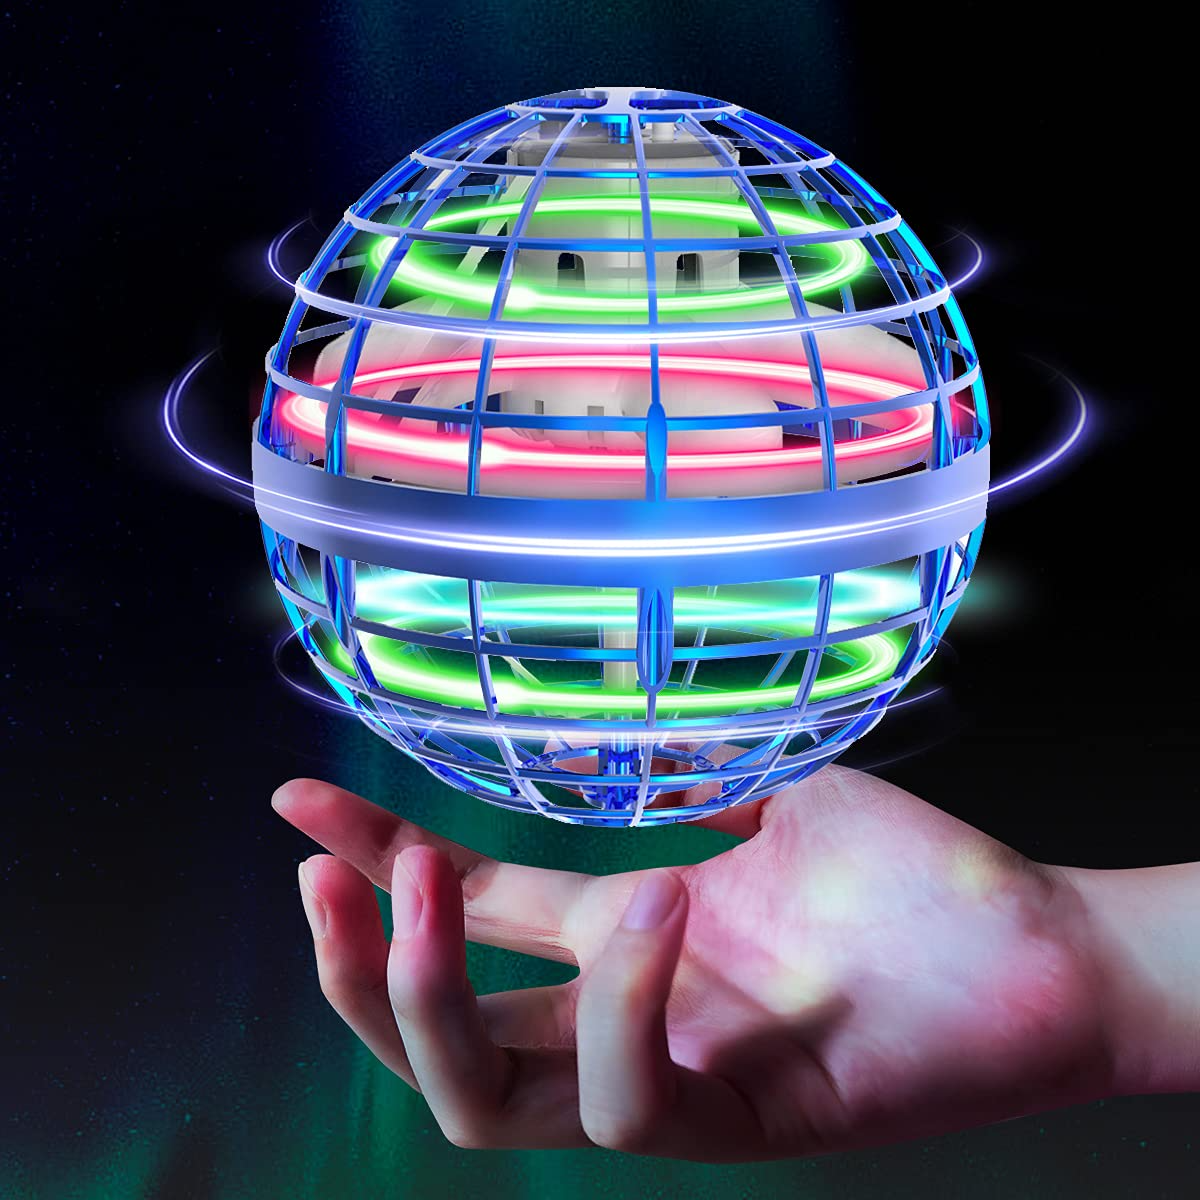 Hover Ball Soaring Nebula Orb Flying Orb Blue Hand Controlled Fly Boomerang Spinner Ball Nova Pro Mini Drone for Kids Adults Outdoor Indoor Flying Orb Ball Toys RGB Light Magic Space UFO Toy 